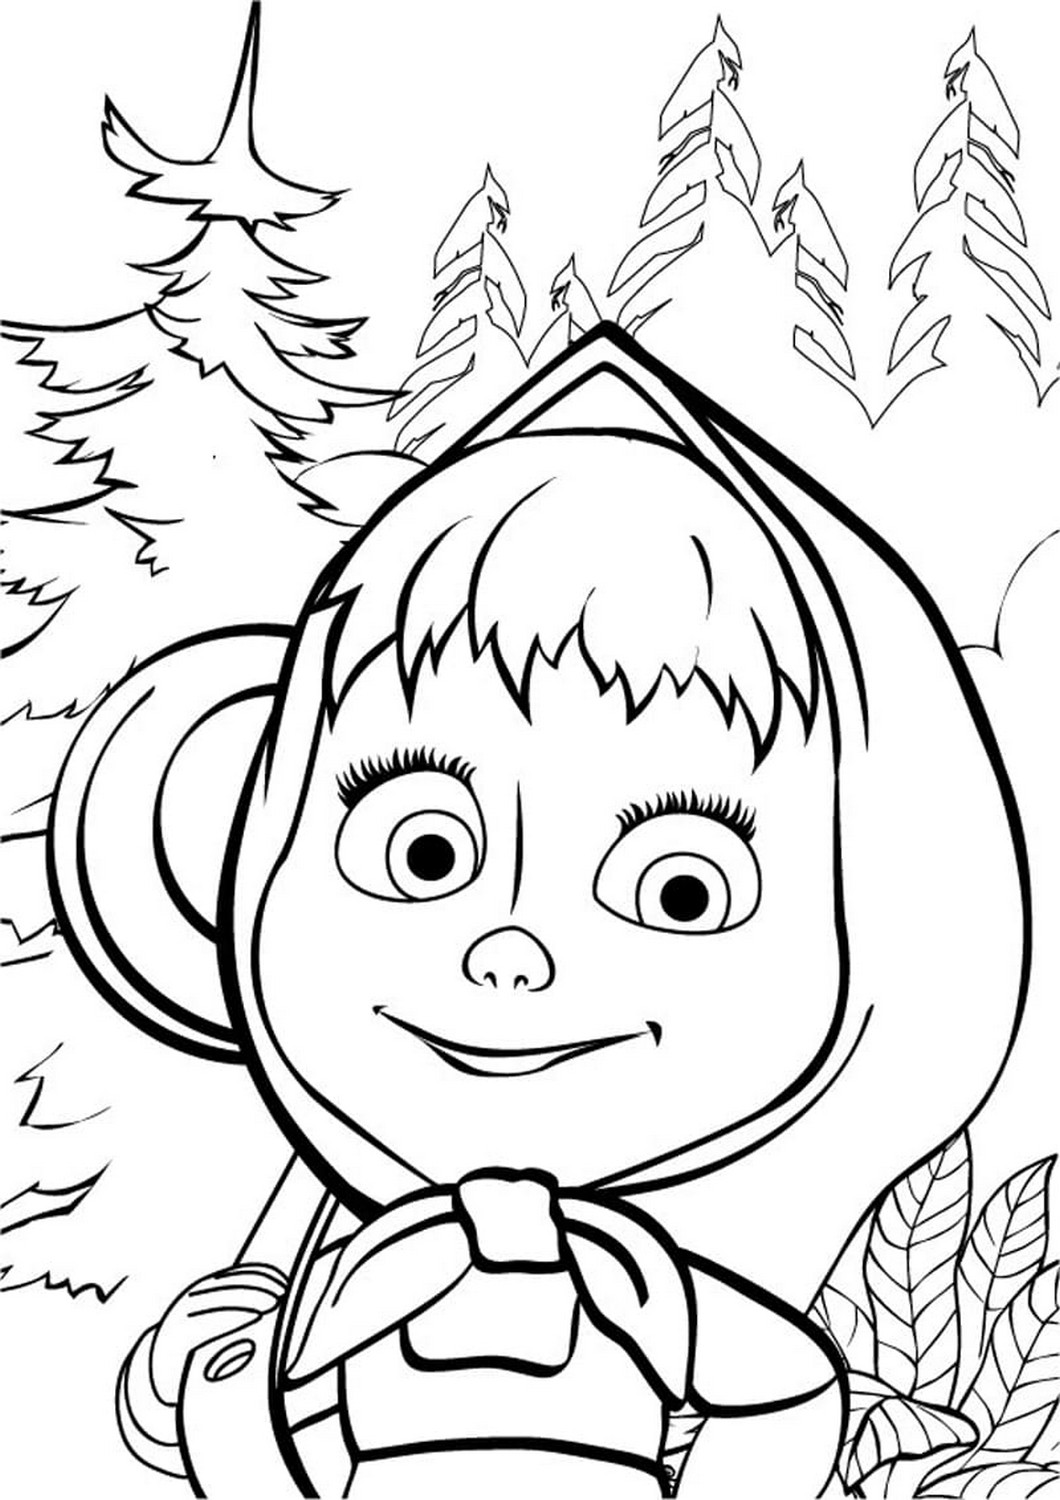 Drawing 23 of Masha and the Bear to print and color